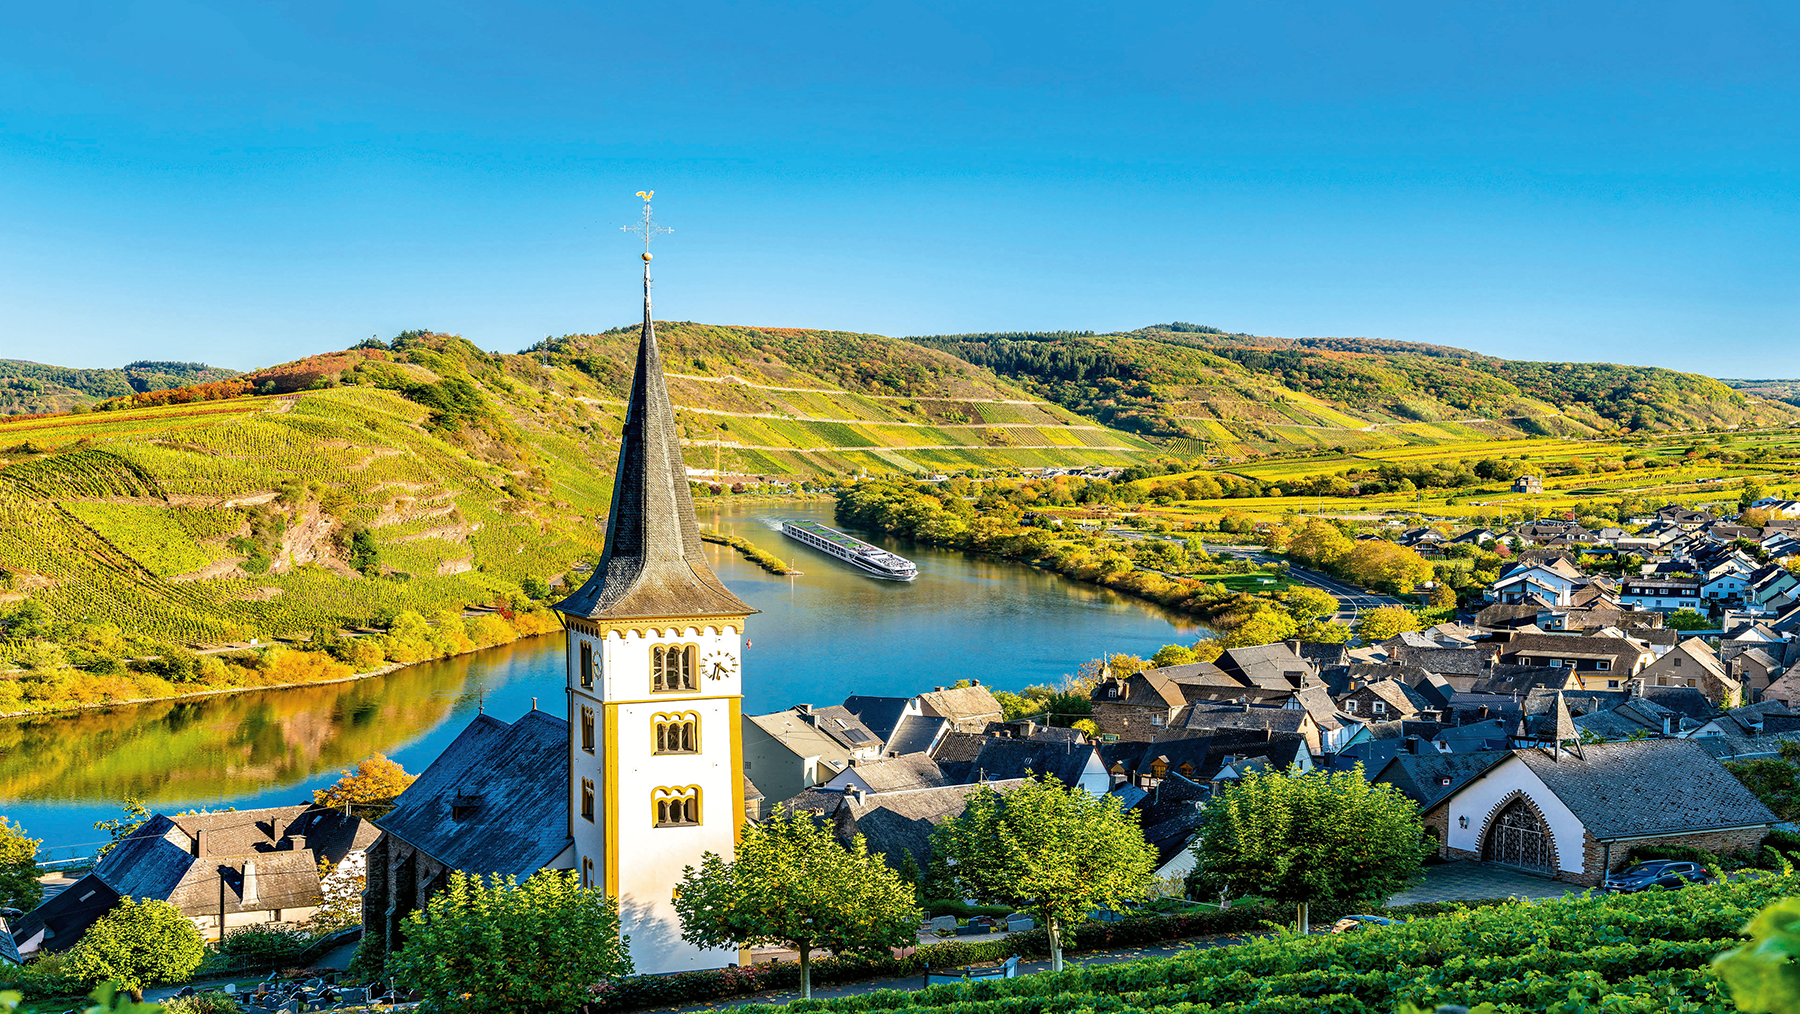 A castle on the Moselle River with a ship in the background